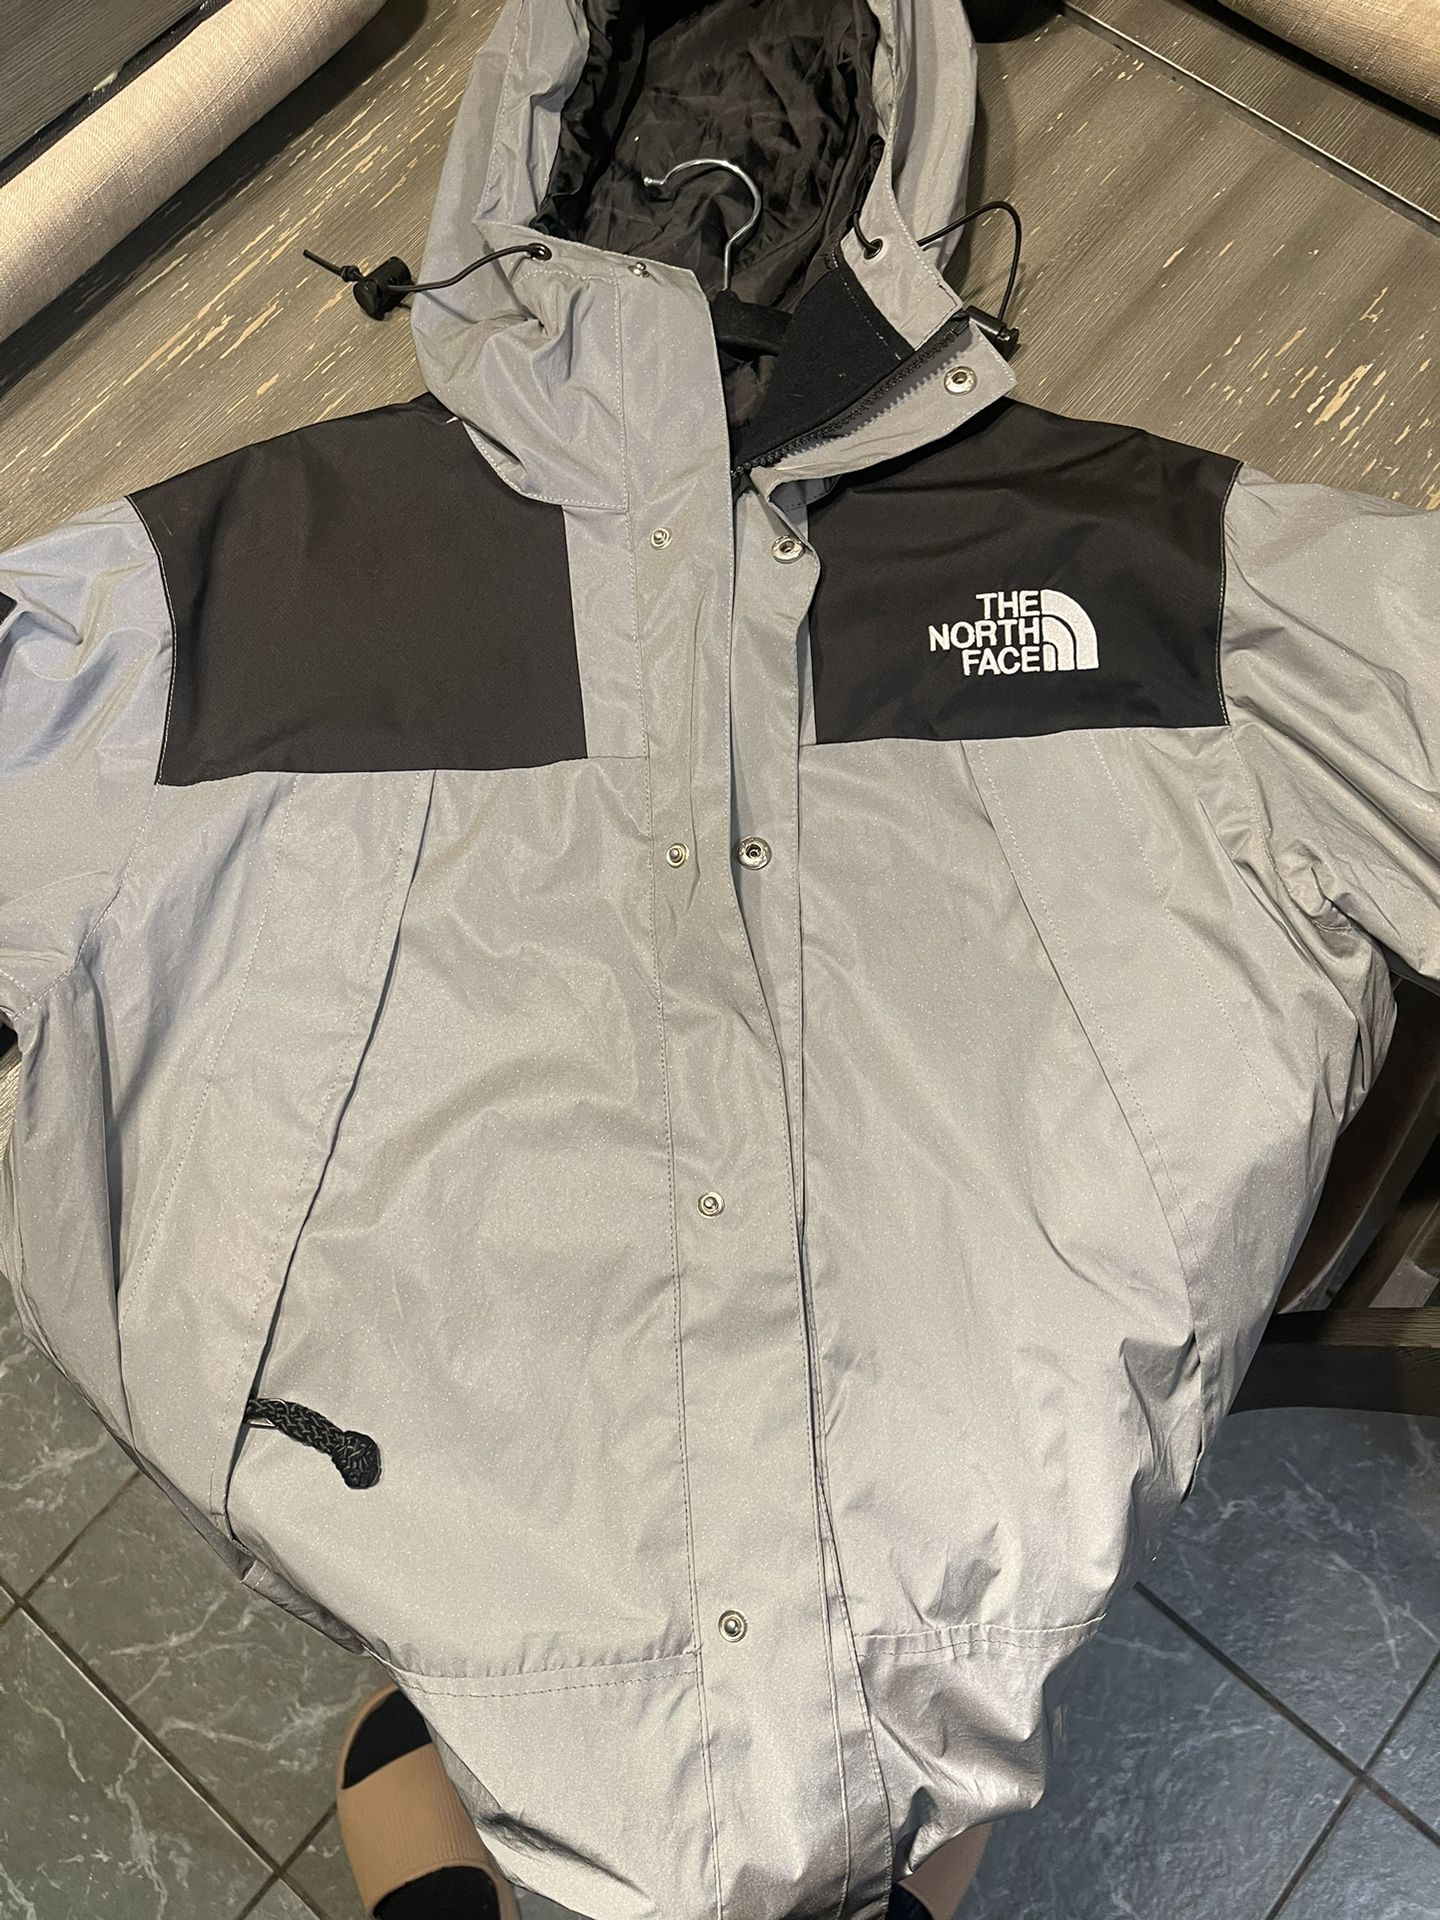 SUPREME “The North Face” Silver Gray Jacket 